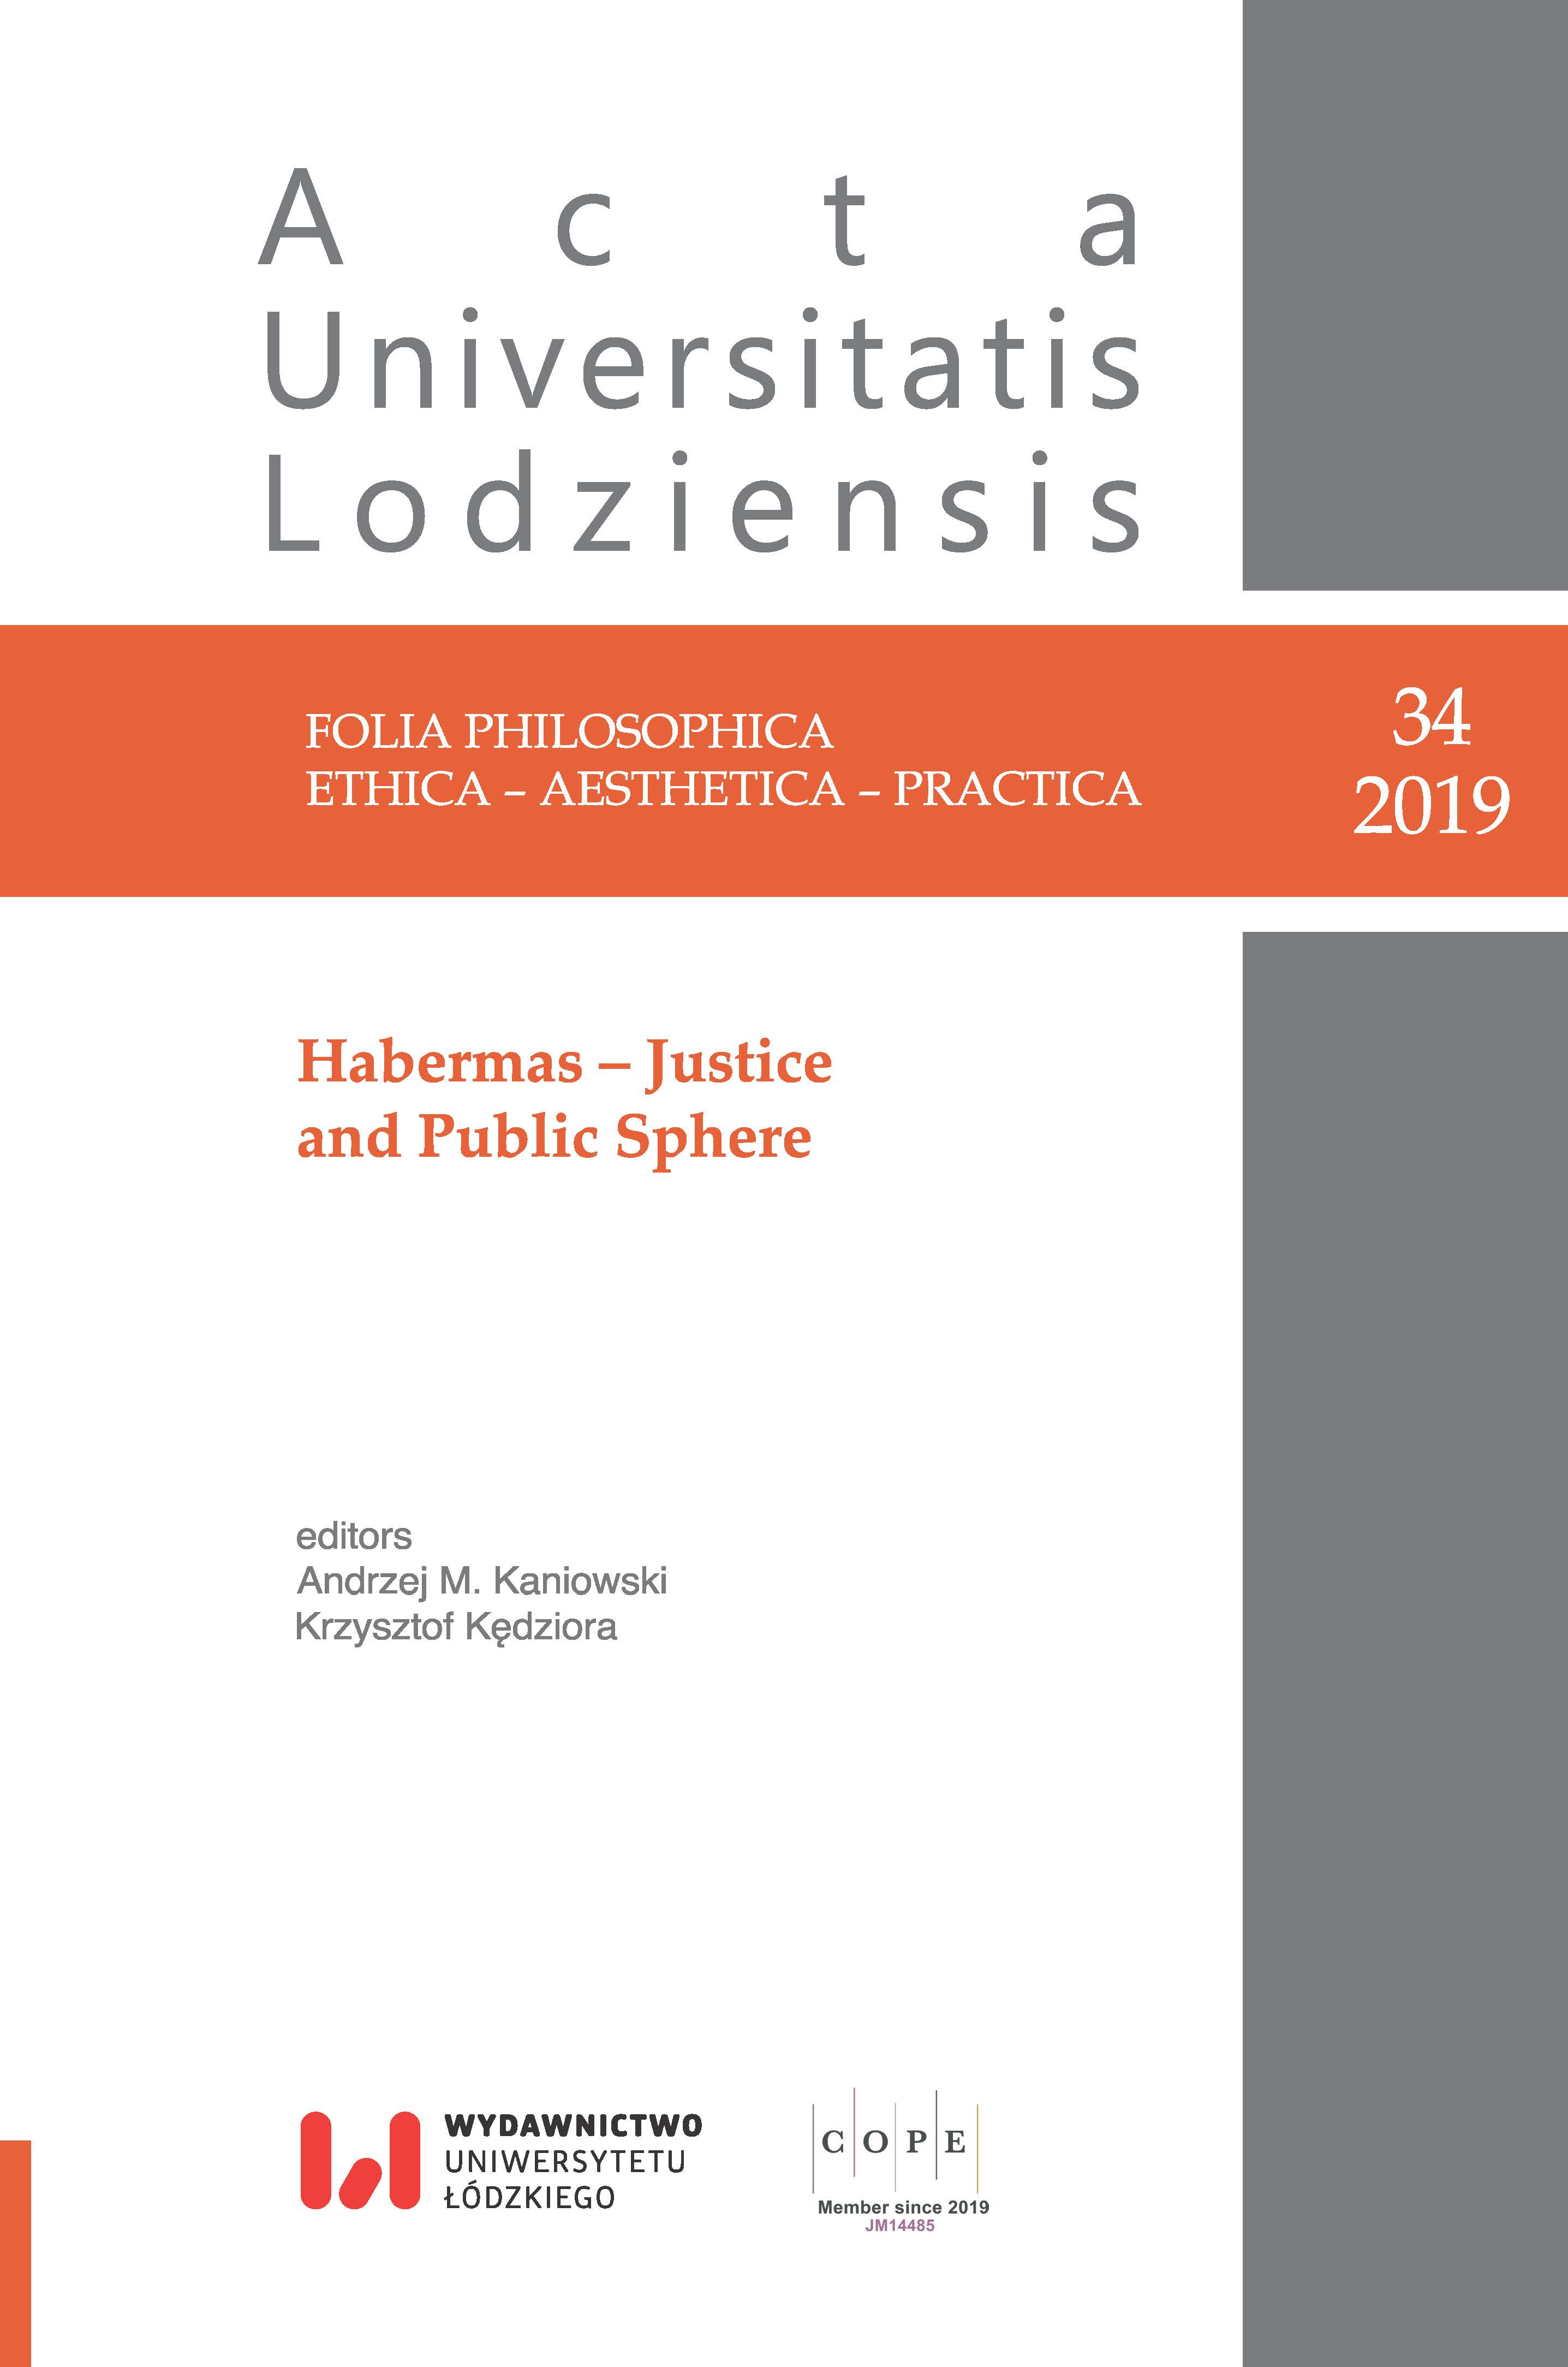 Does Philosophy Require De-Transcendentalization? Habermas, Apel, and the Role of Transcendentals in Philosophical Discourse and Social-Scientific Explanation Cover Image